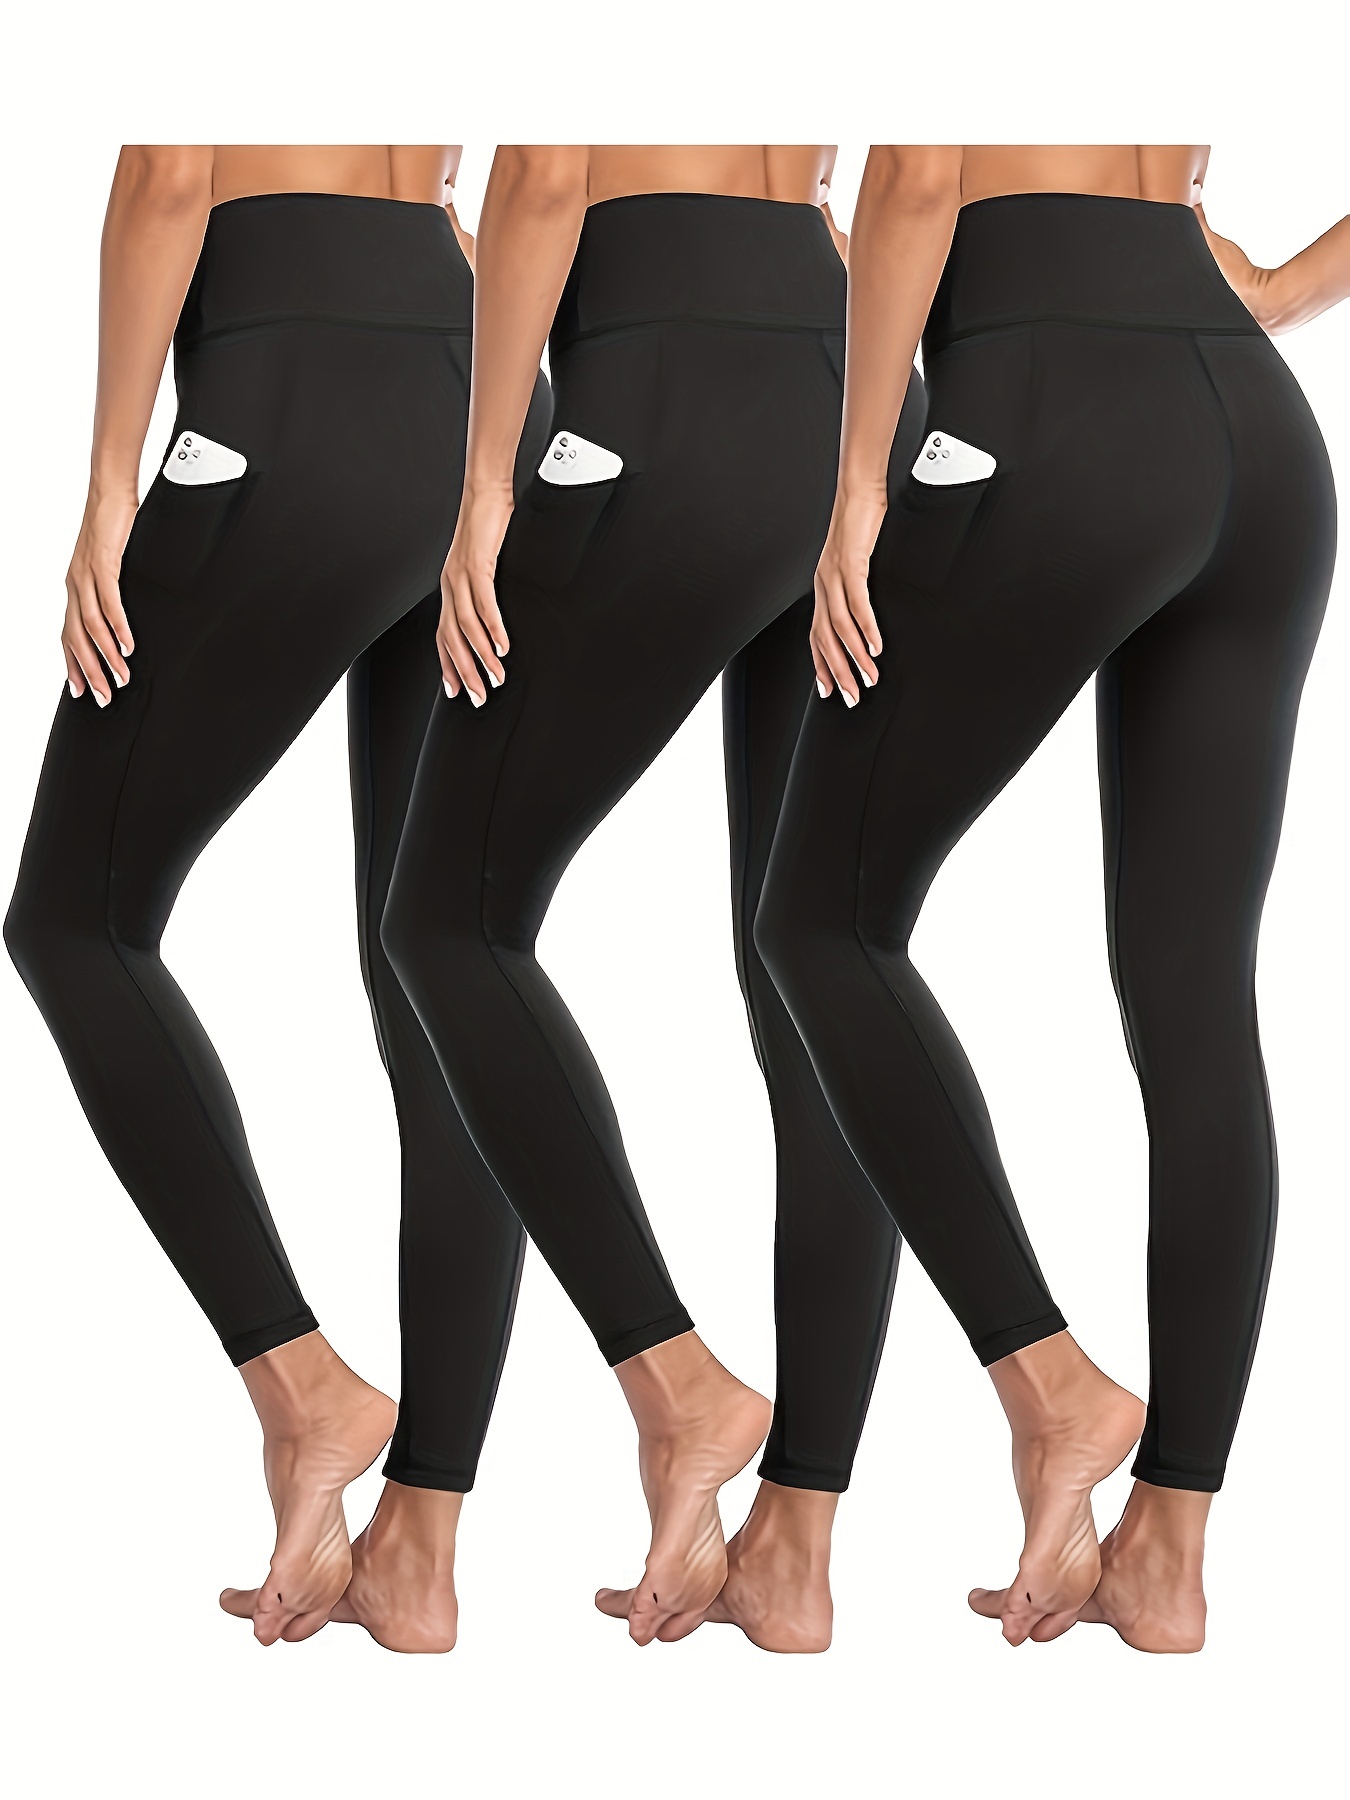 Yogalicious Slimming Women's Leggings With Pockets